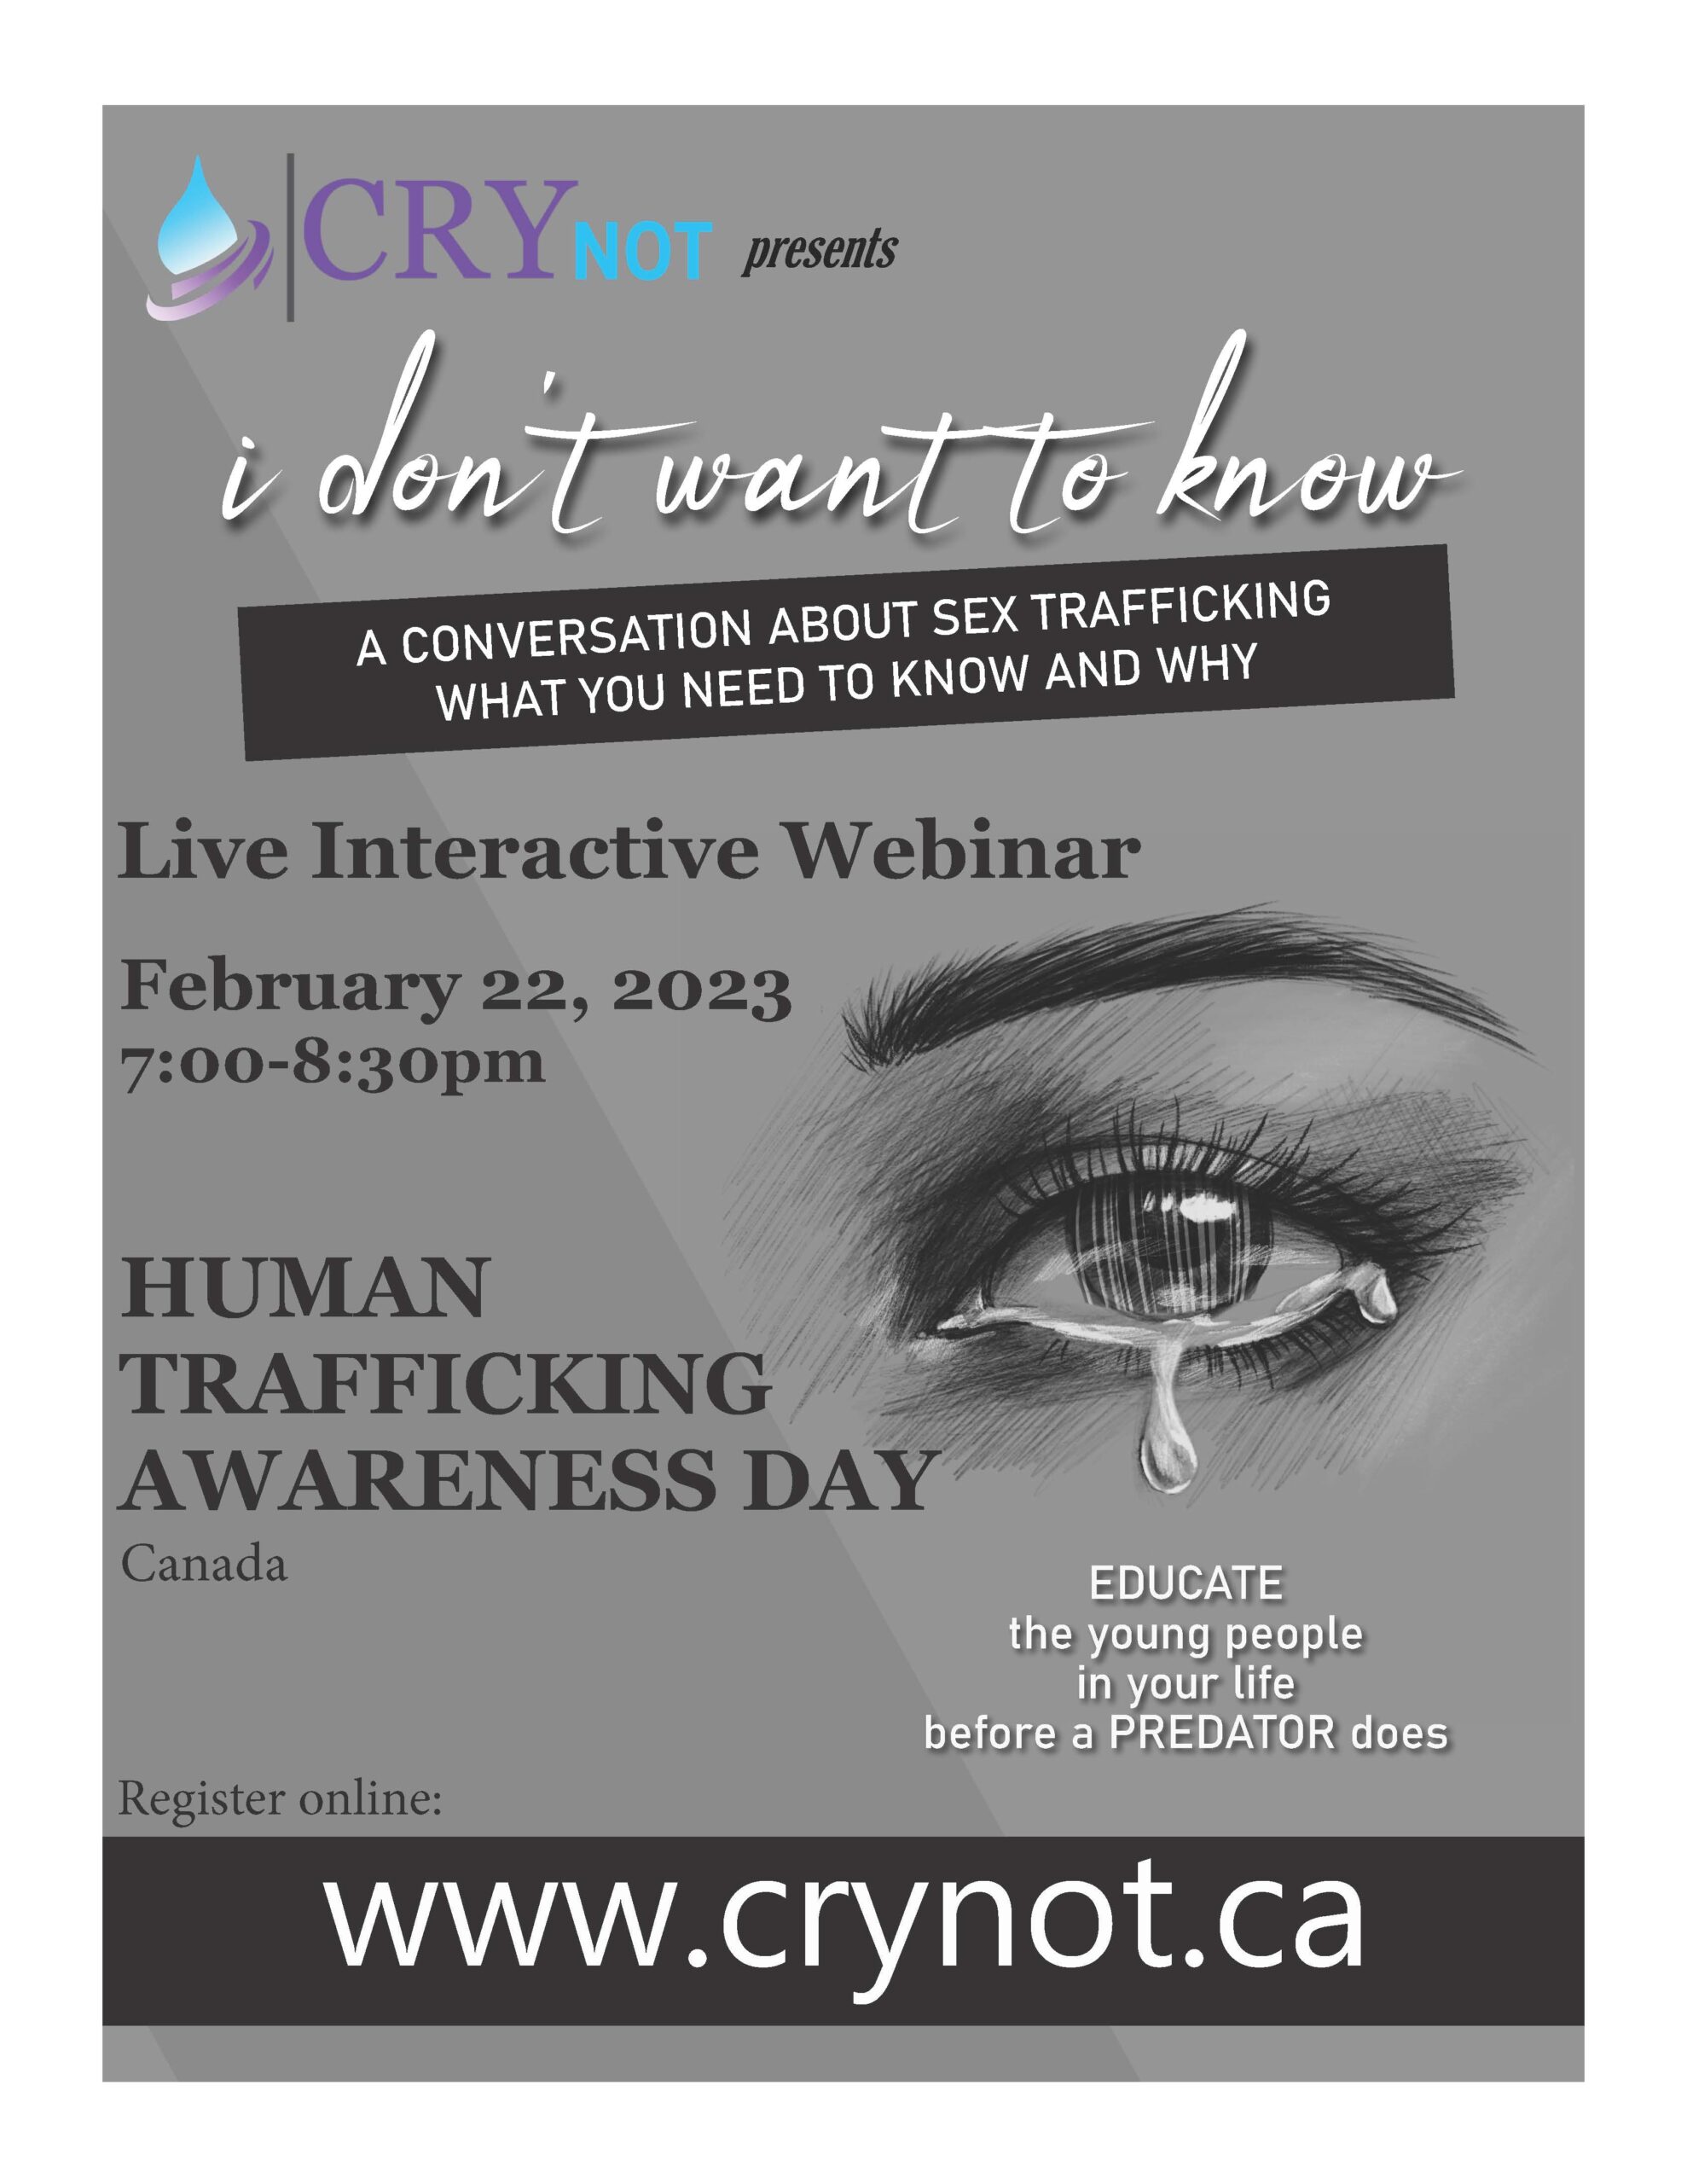 Poster for event. Human Trafficking Awareness Day Webinar.  February 22. Register at Crynot.ca